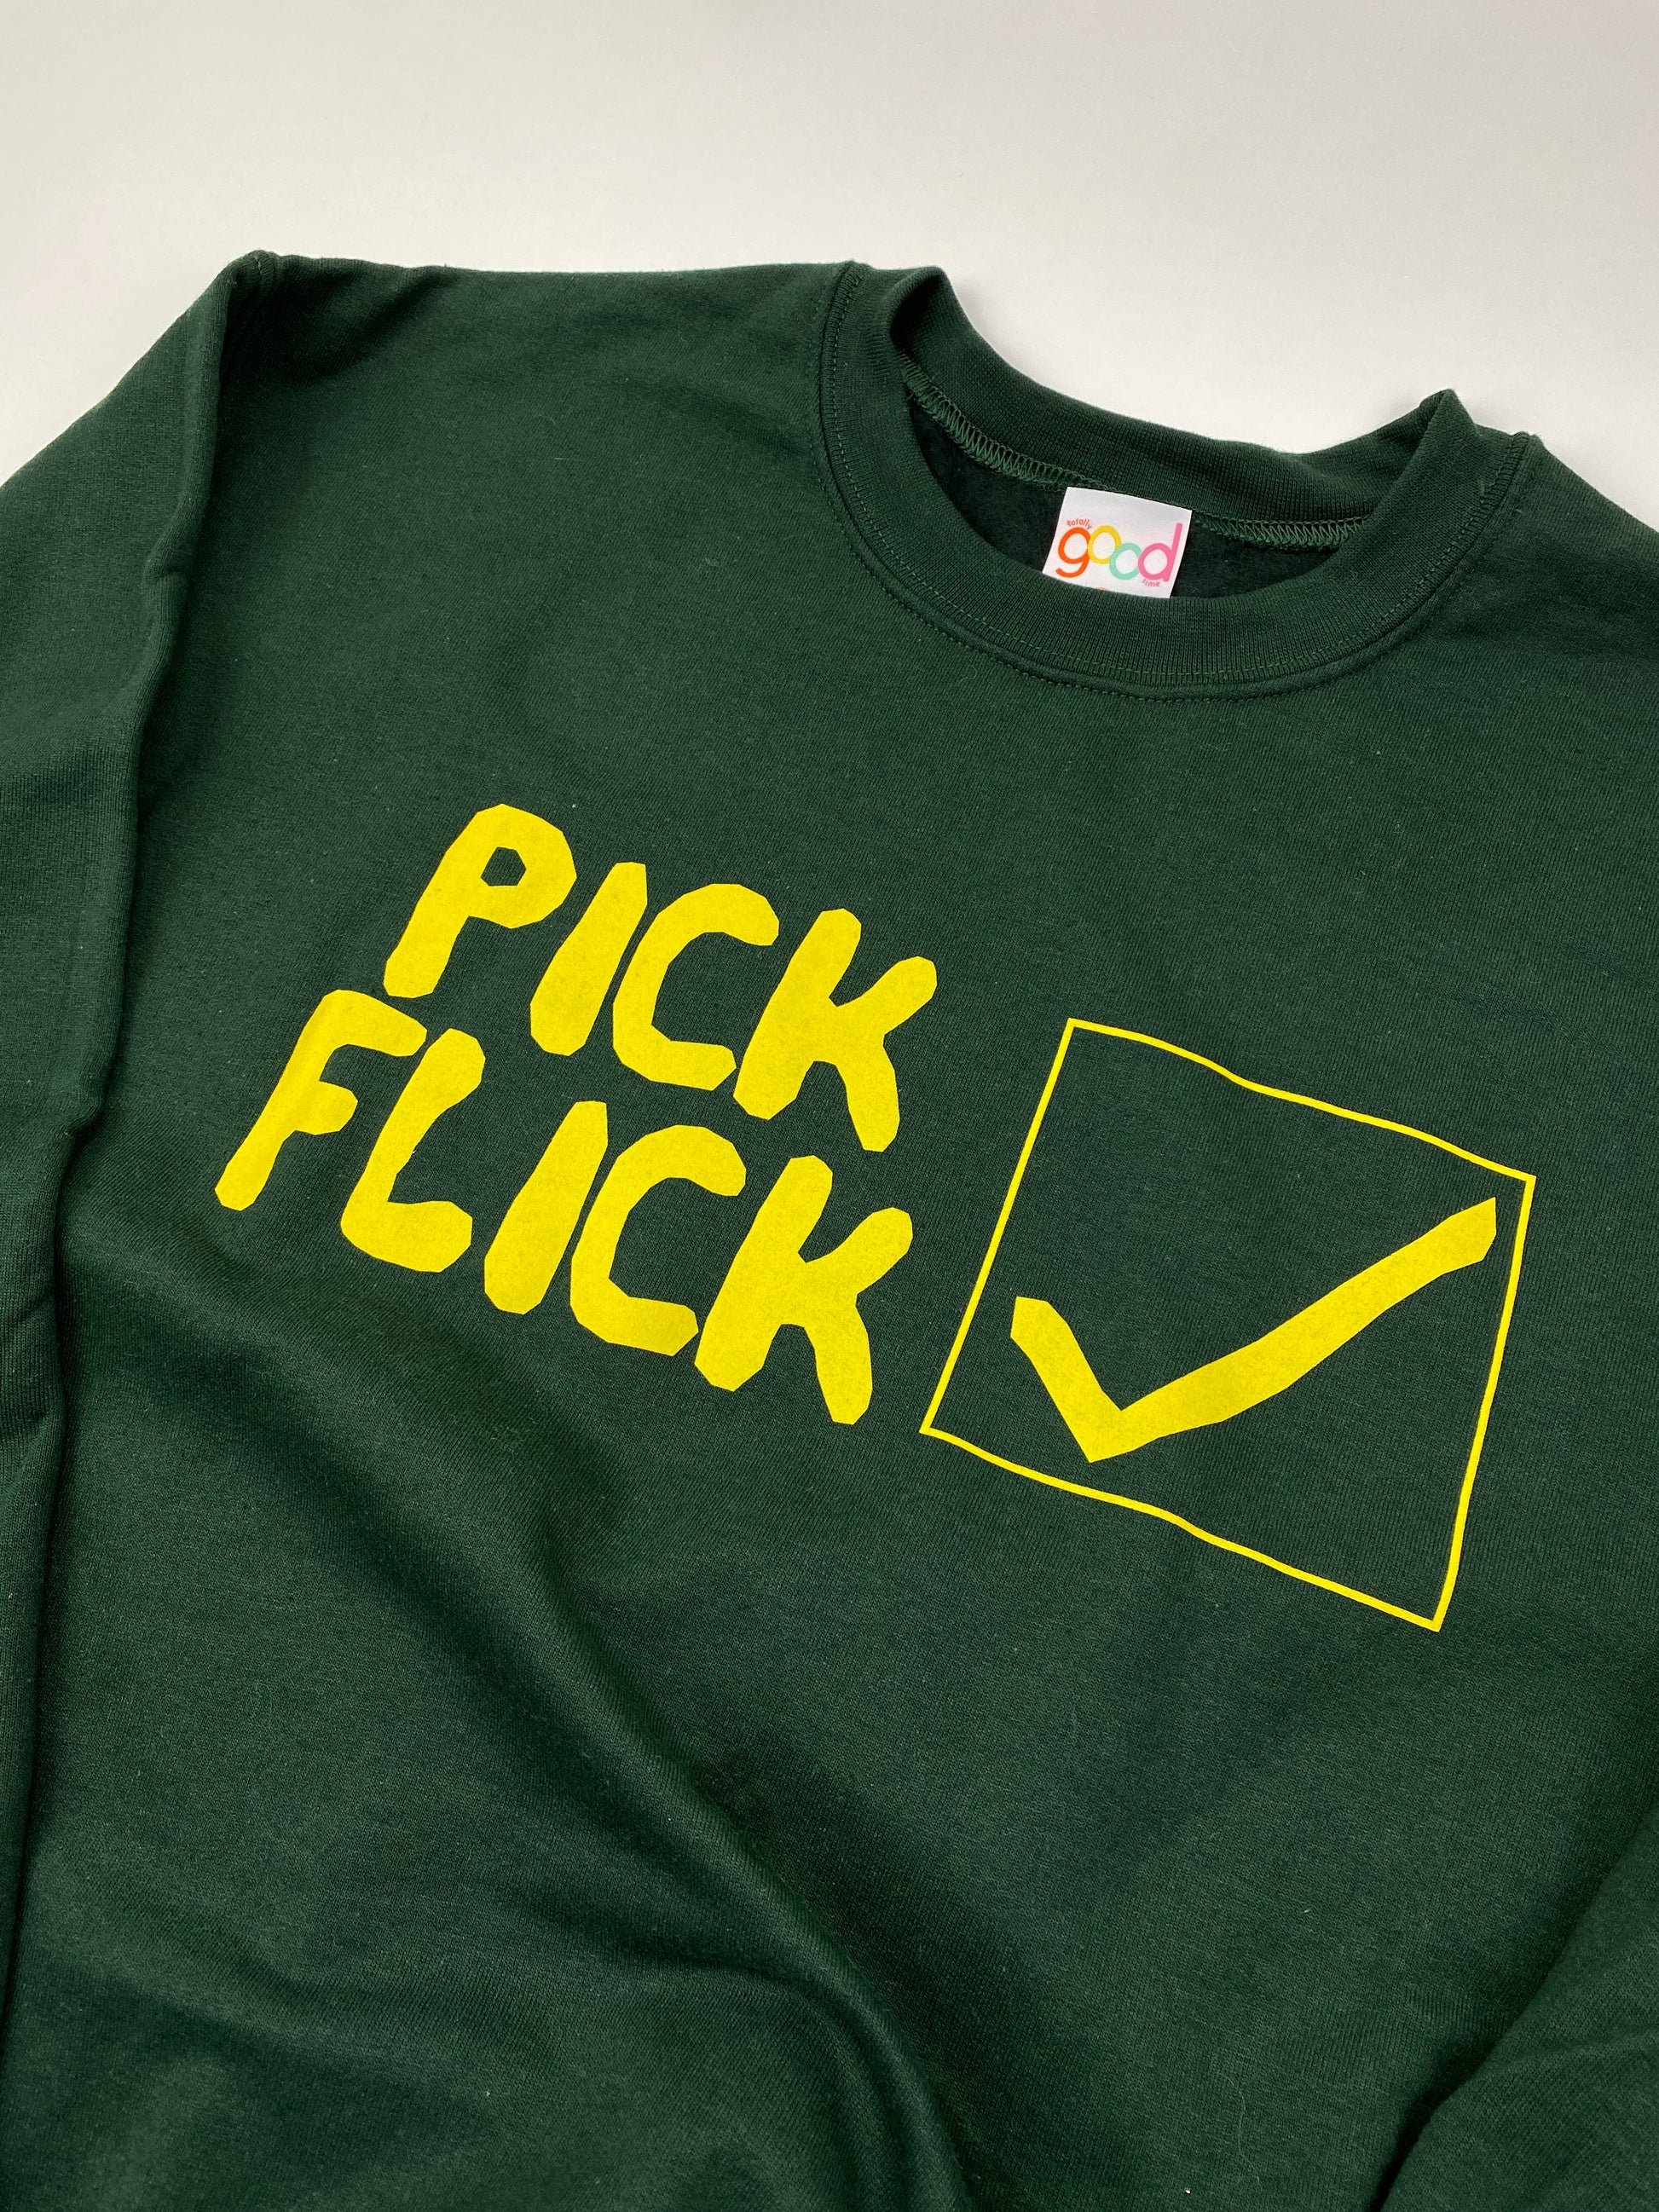 Election Tracy Flick Pick Flick Sweatshirt - Totally Good Time